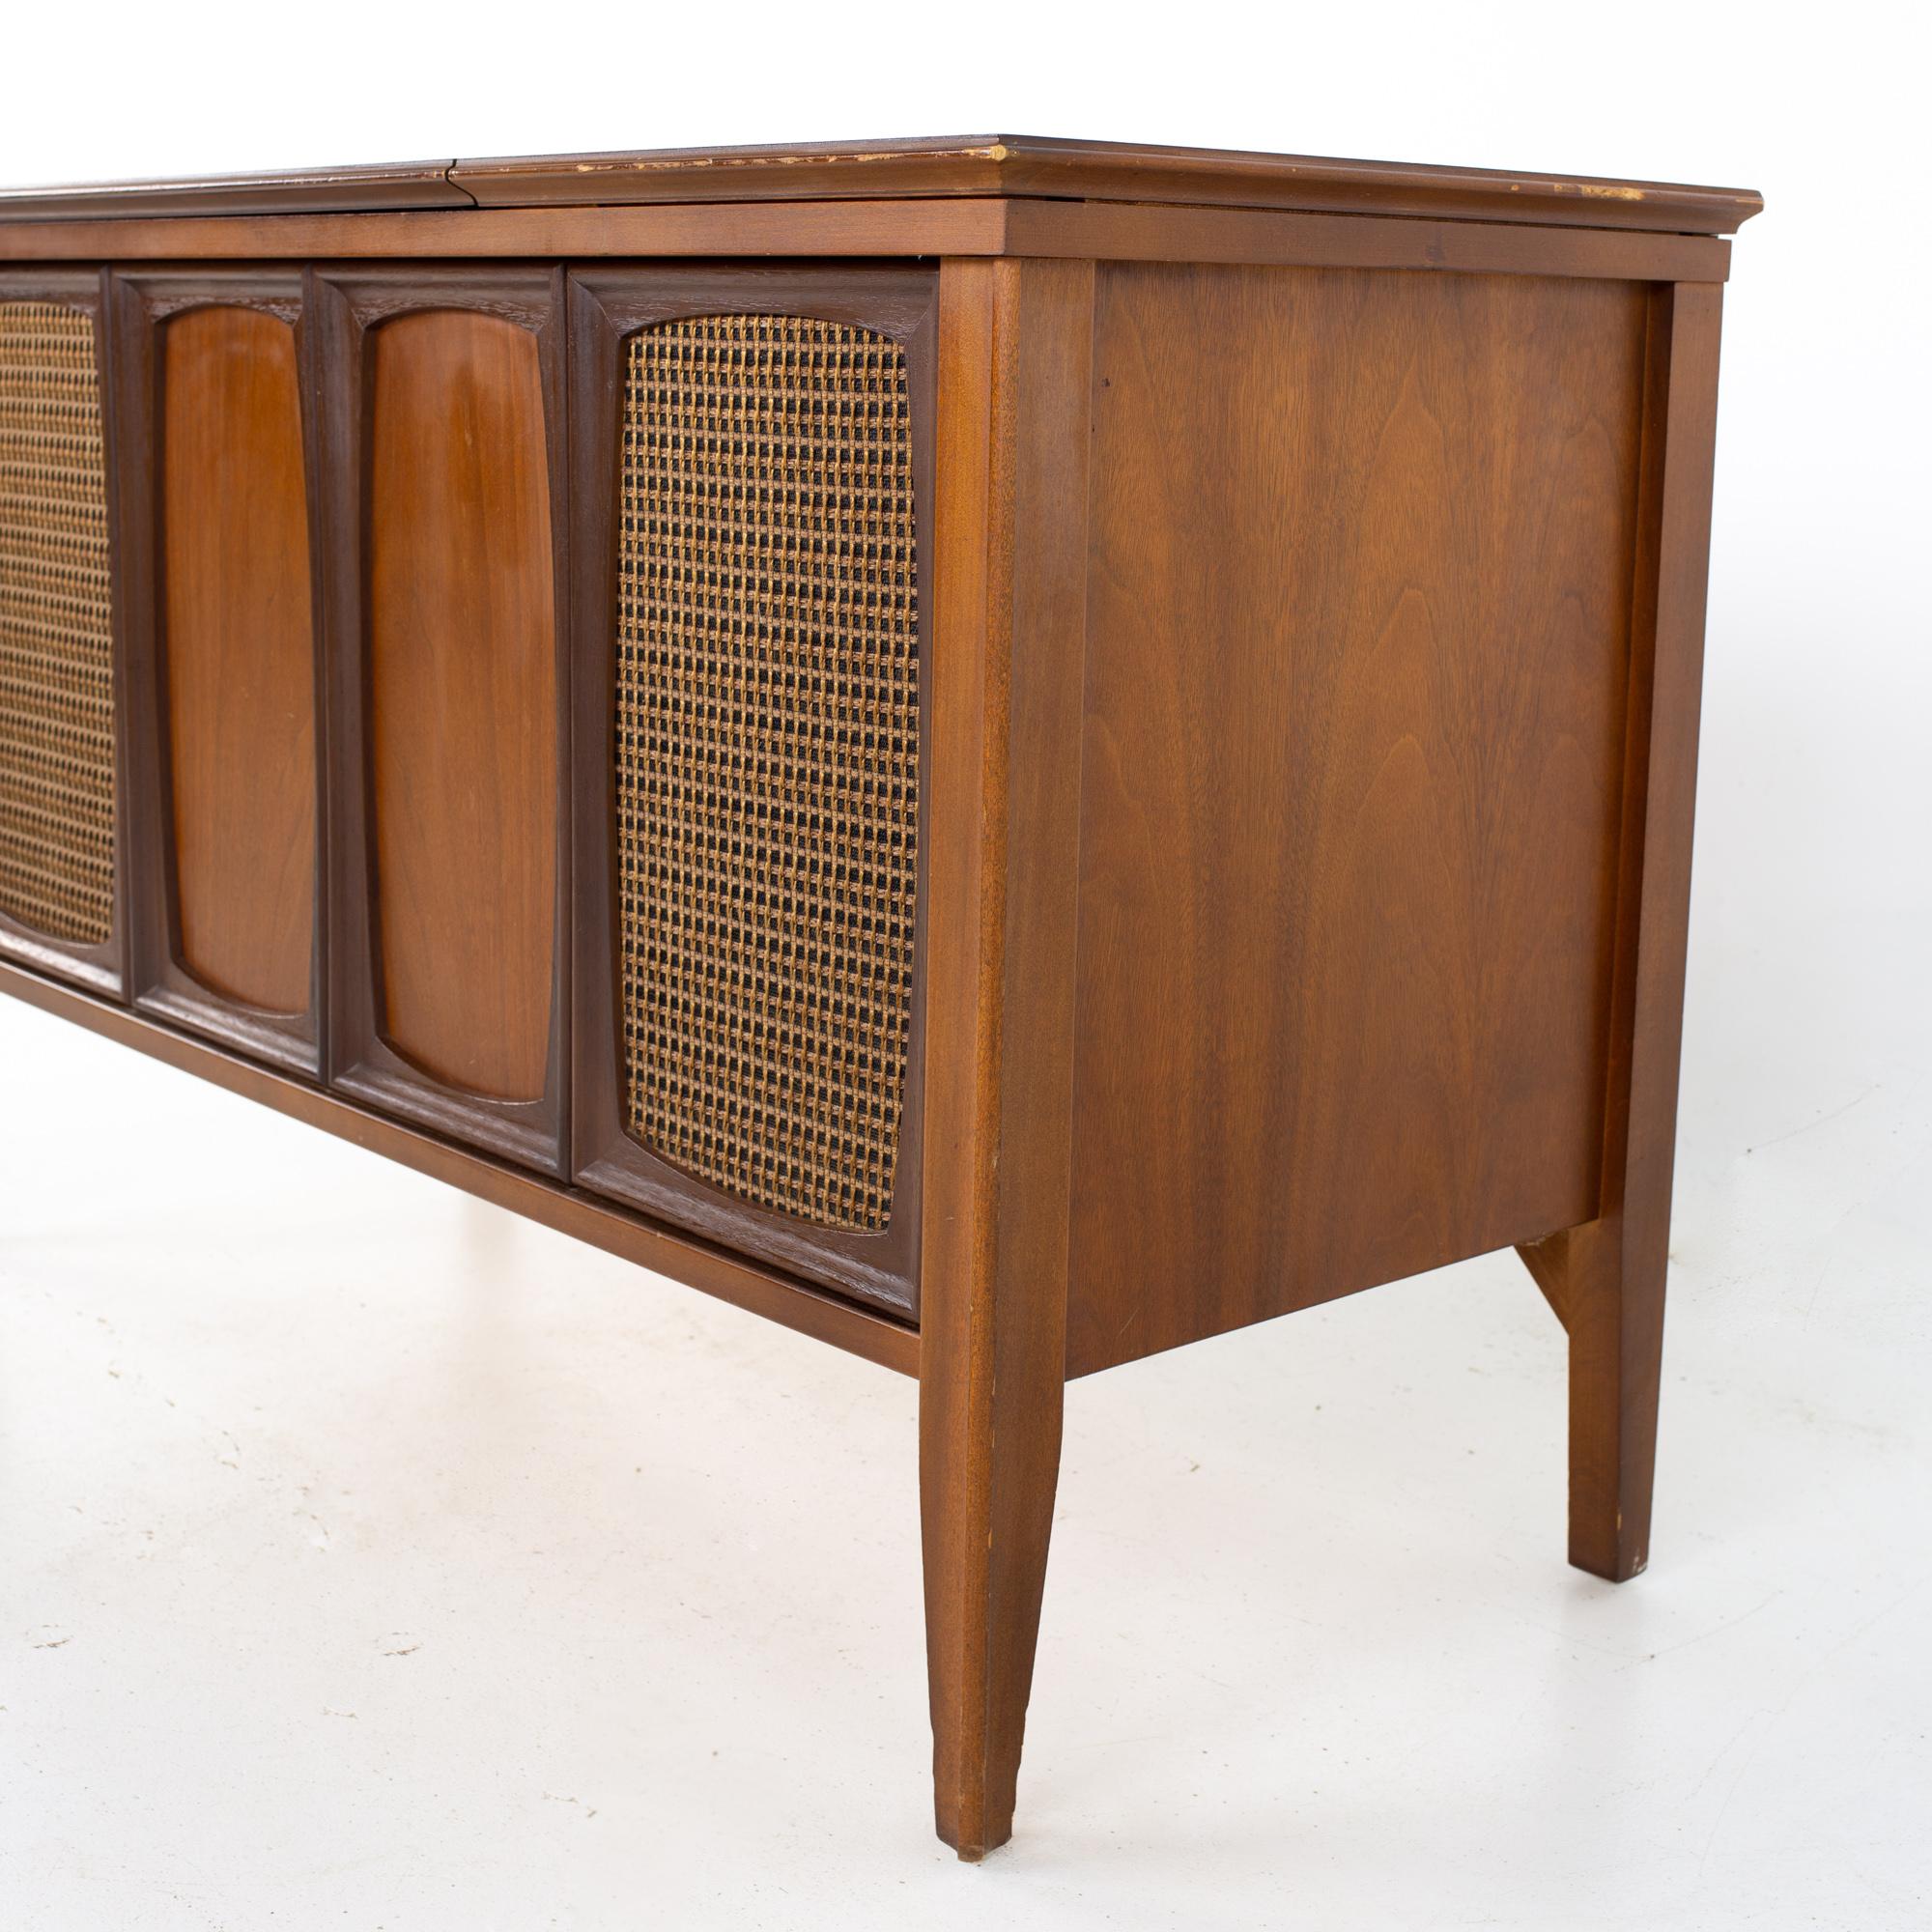 1968 zenith console stereo